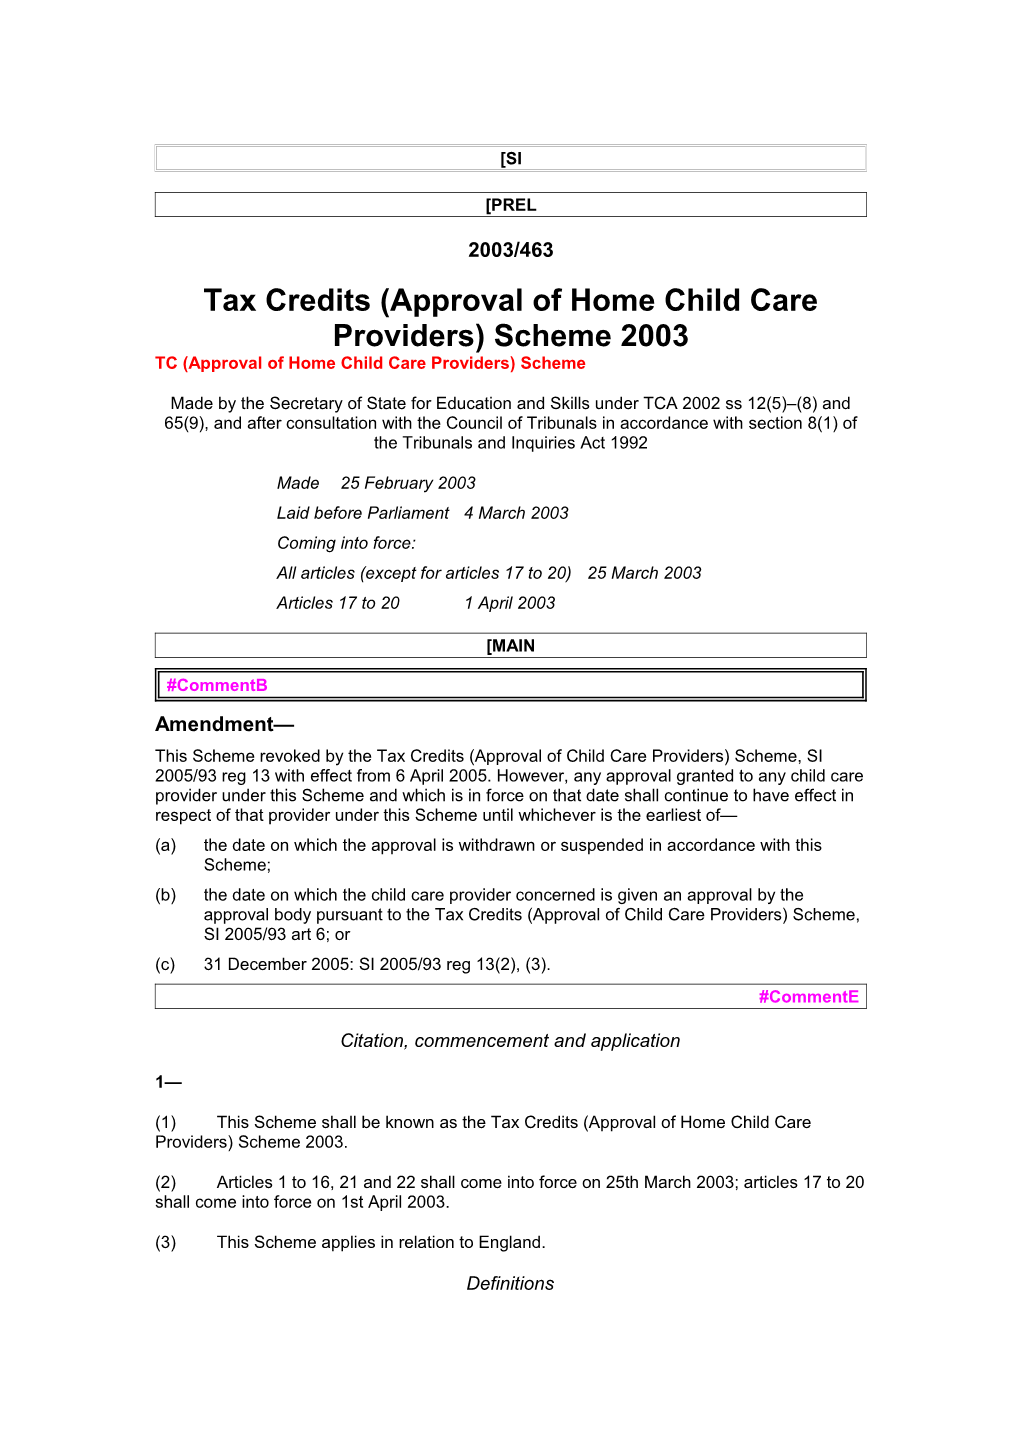 Tax Credits (Approval of Home Child Care Providers) Scheme 2003